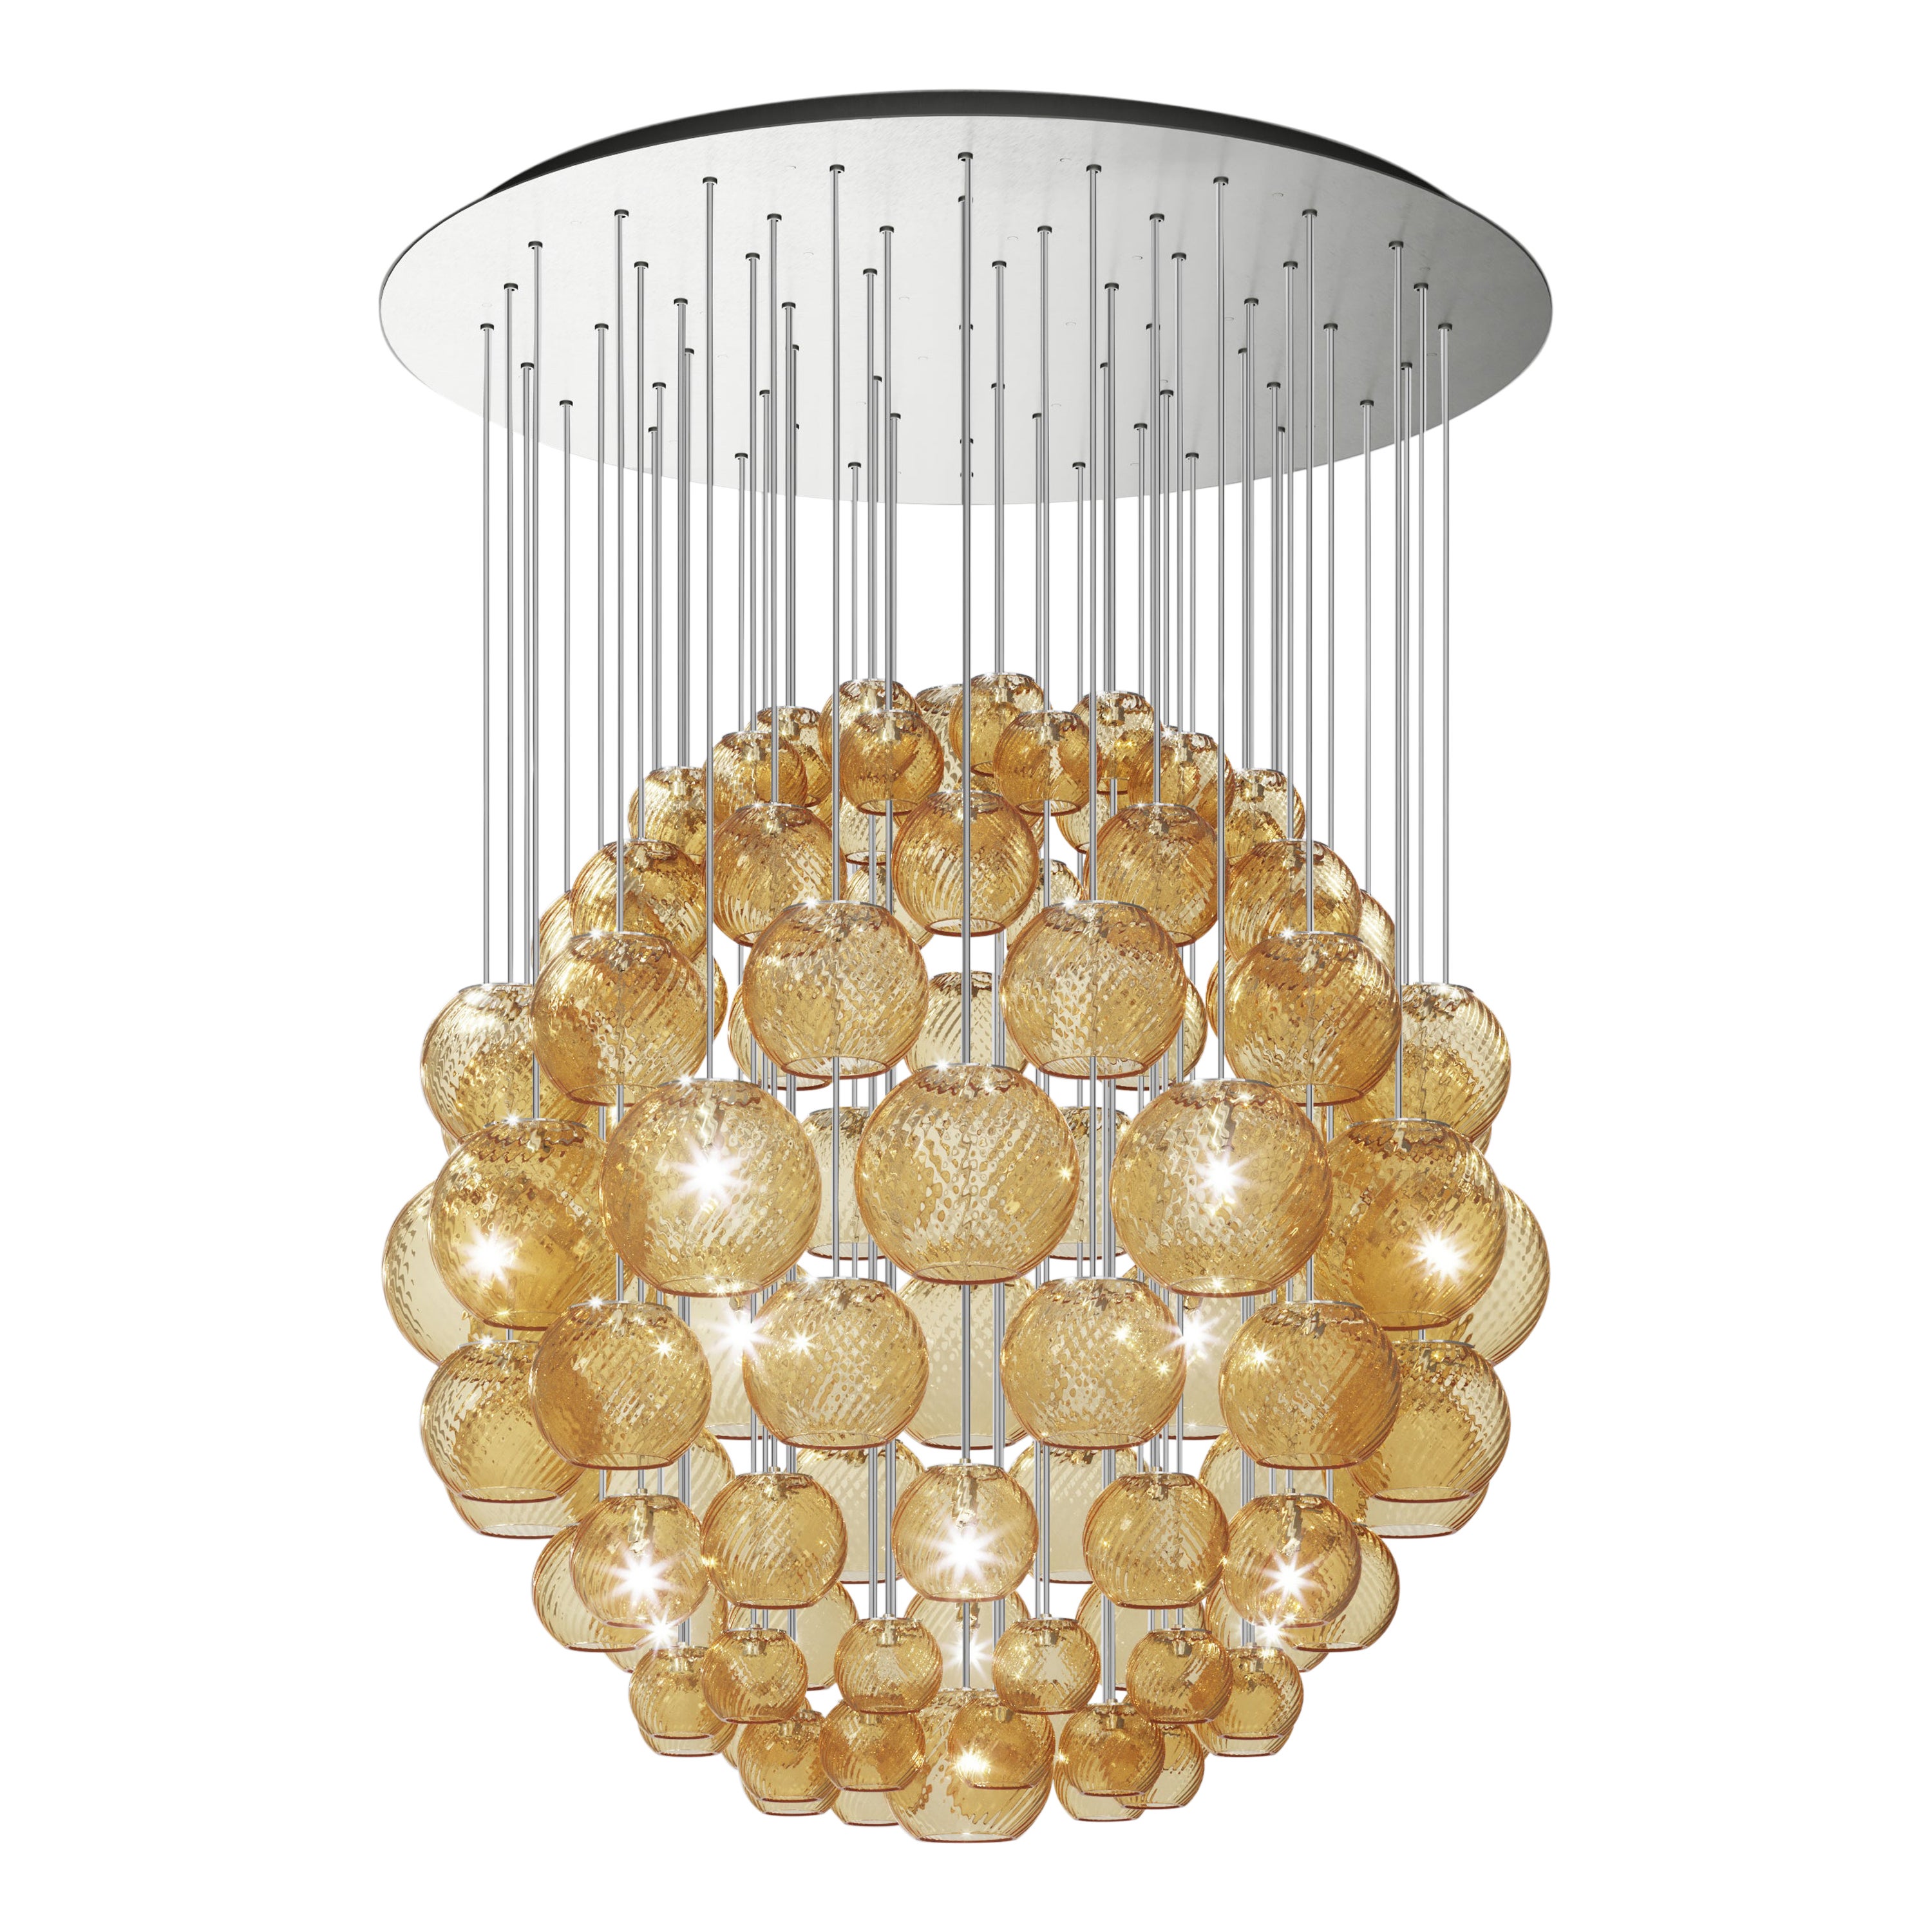 Vistosi Pendant Light in Amber Striped Glass And Satin Nickel Frame For Sale